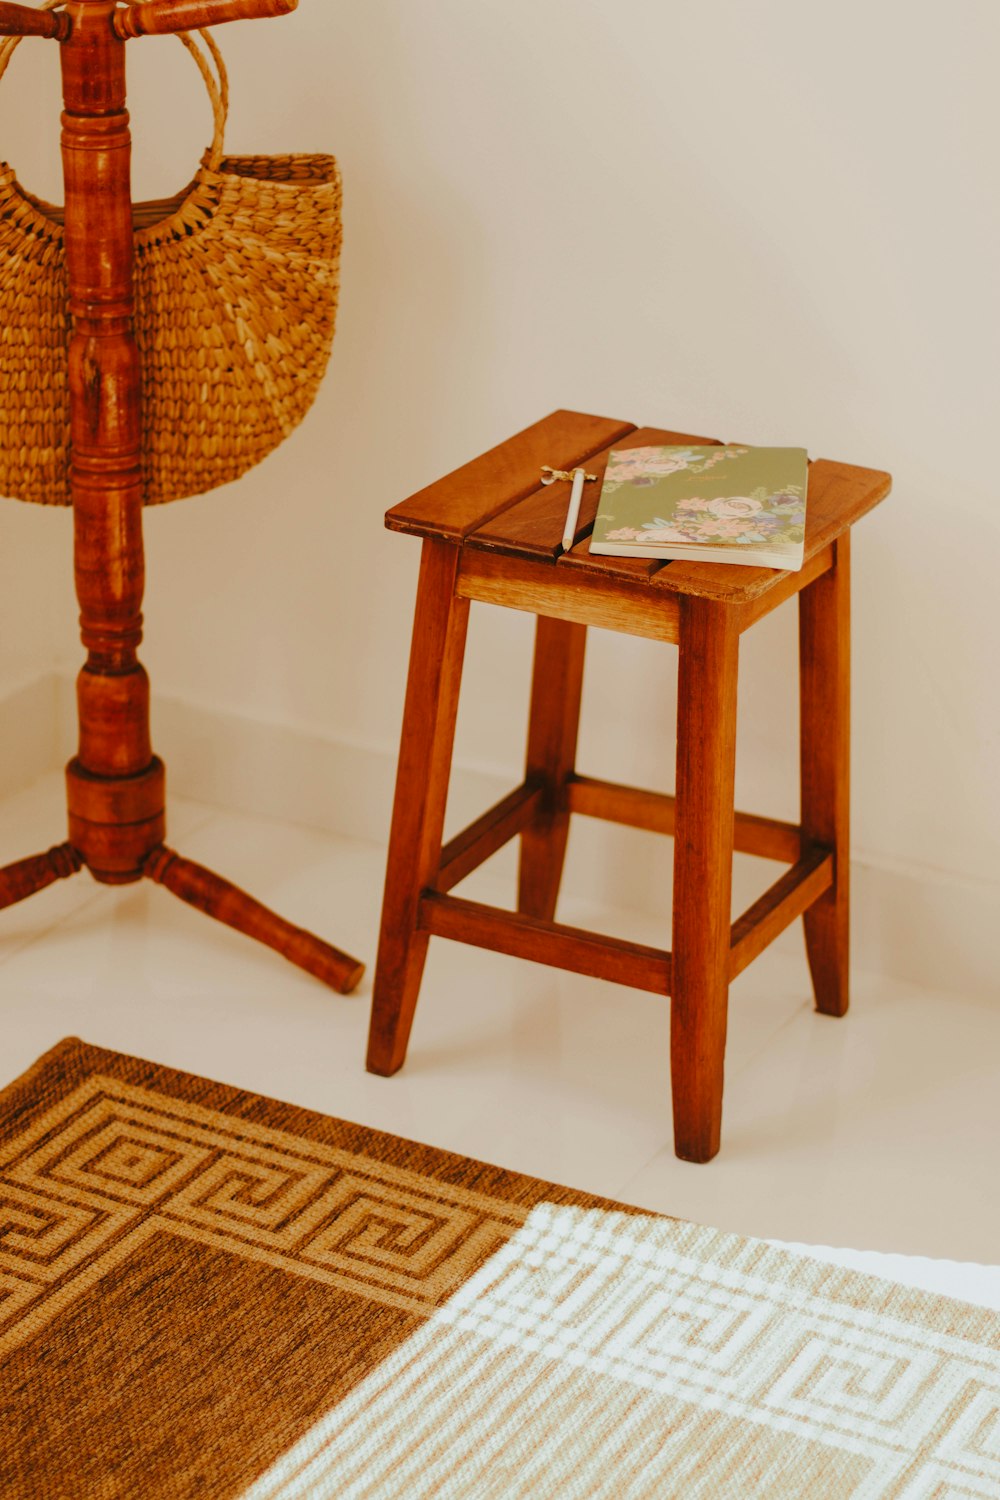 brown wooden table with white and green book on top